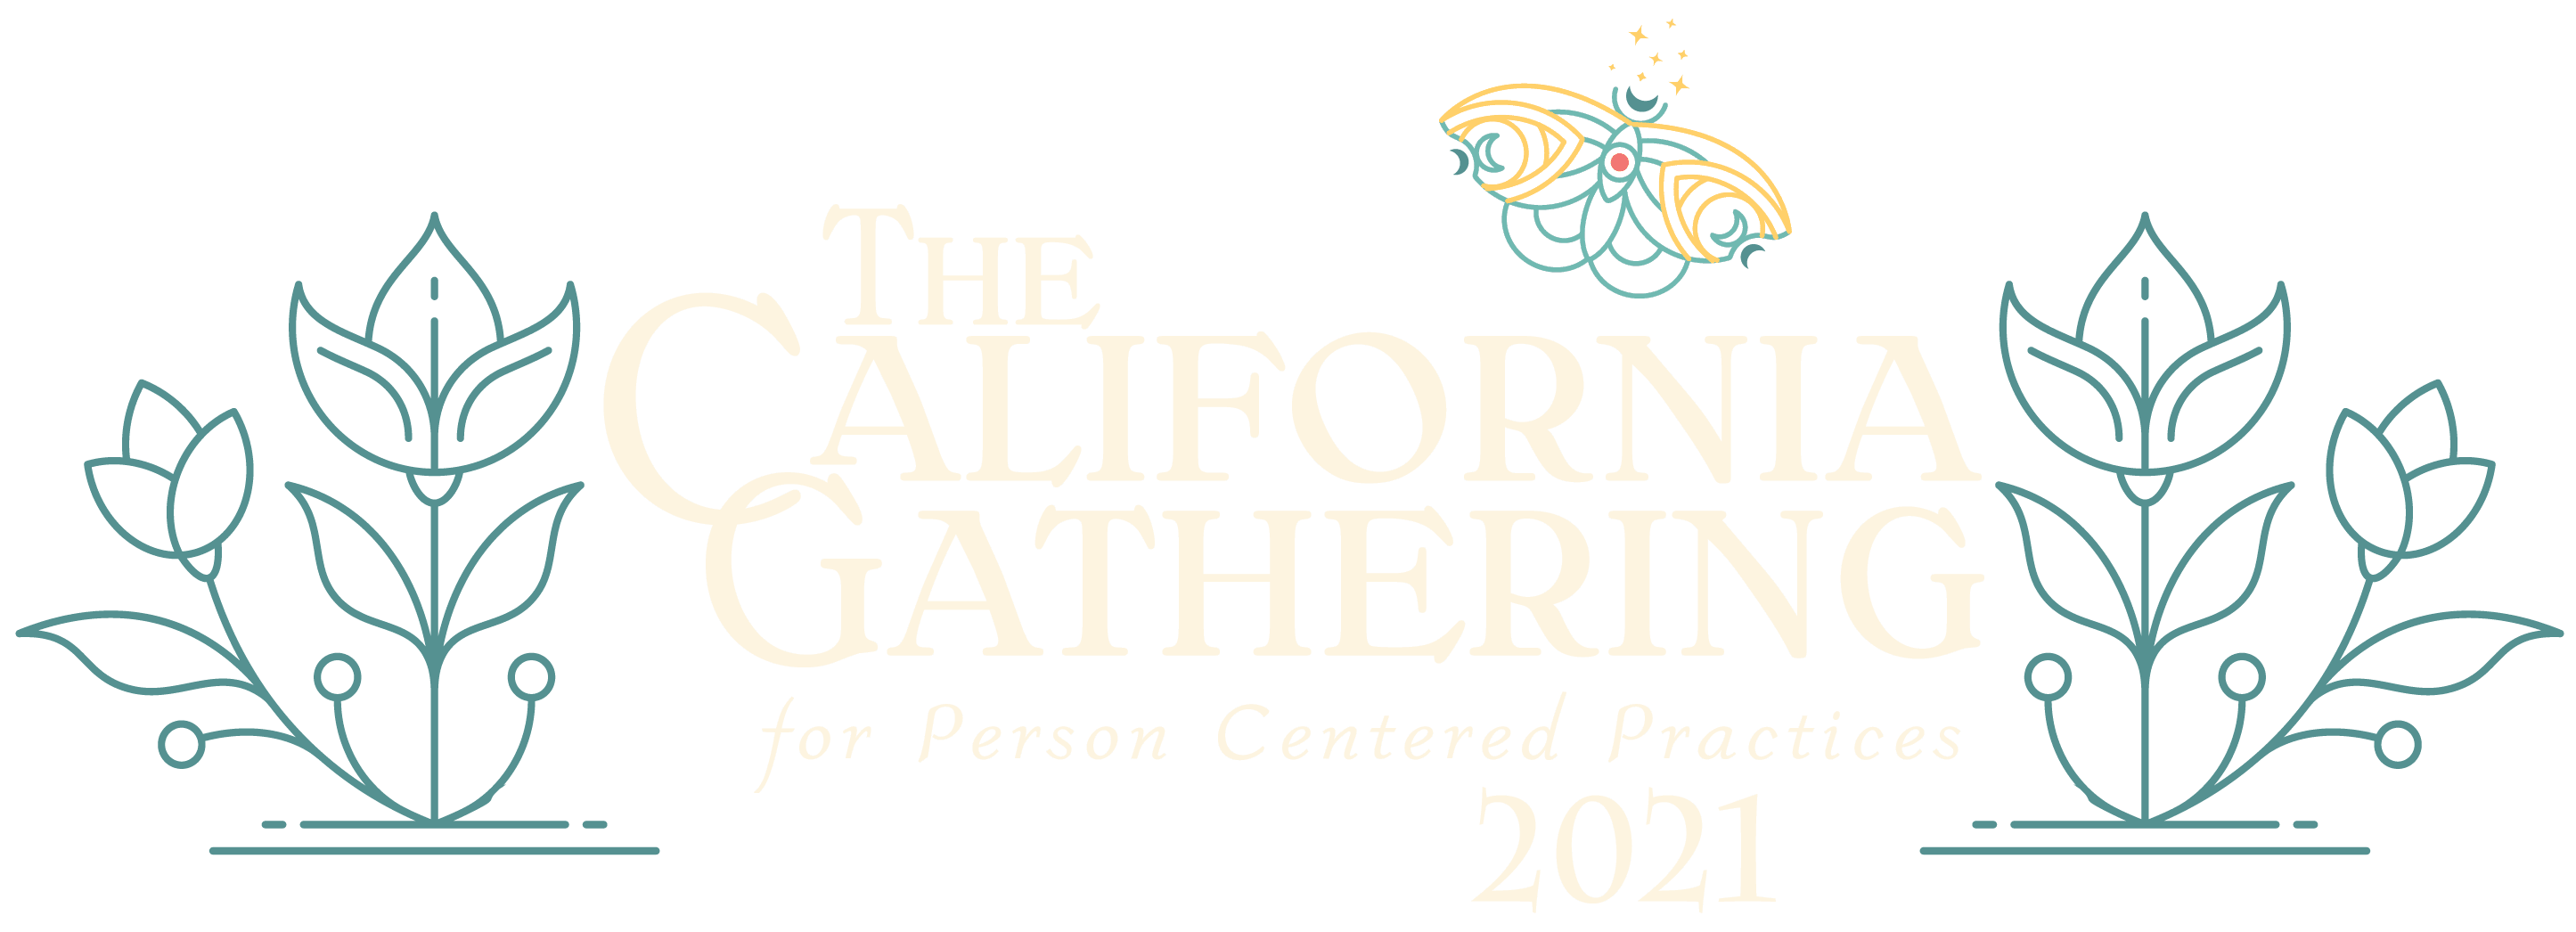 The California Gathering for Person Centered Practices 2021